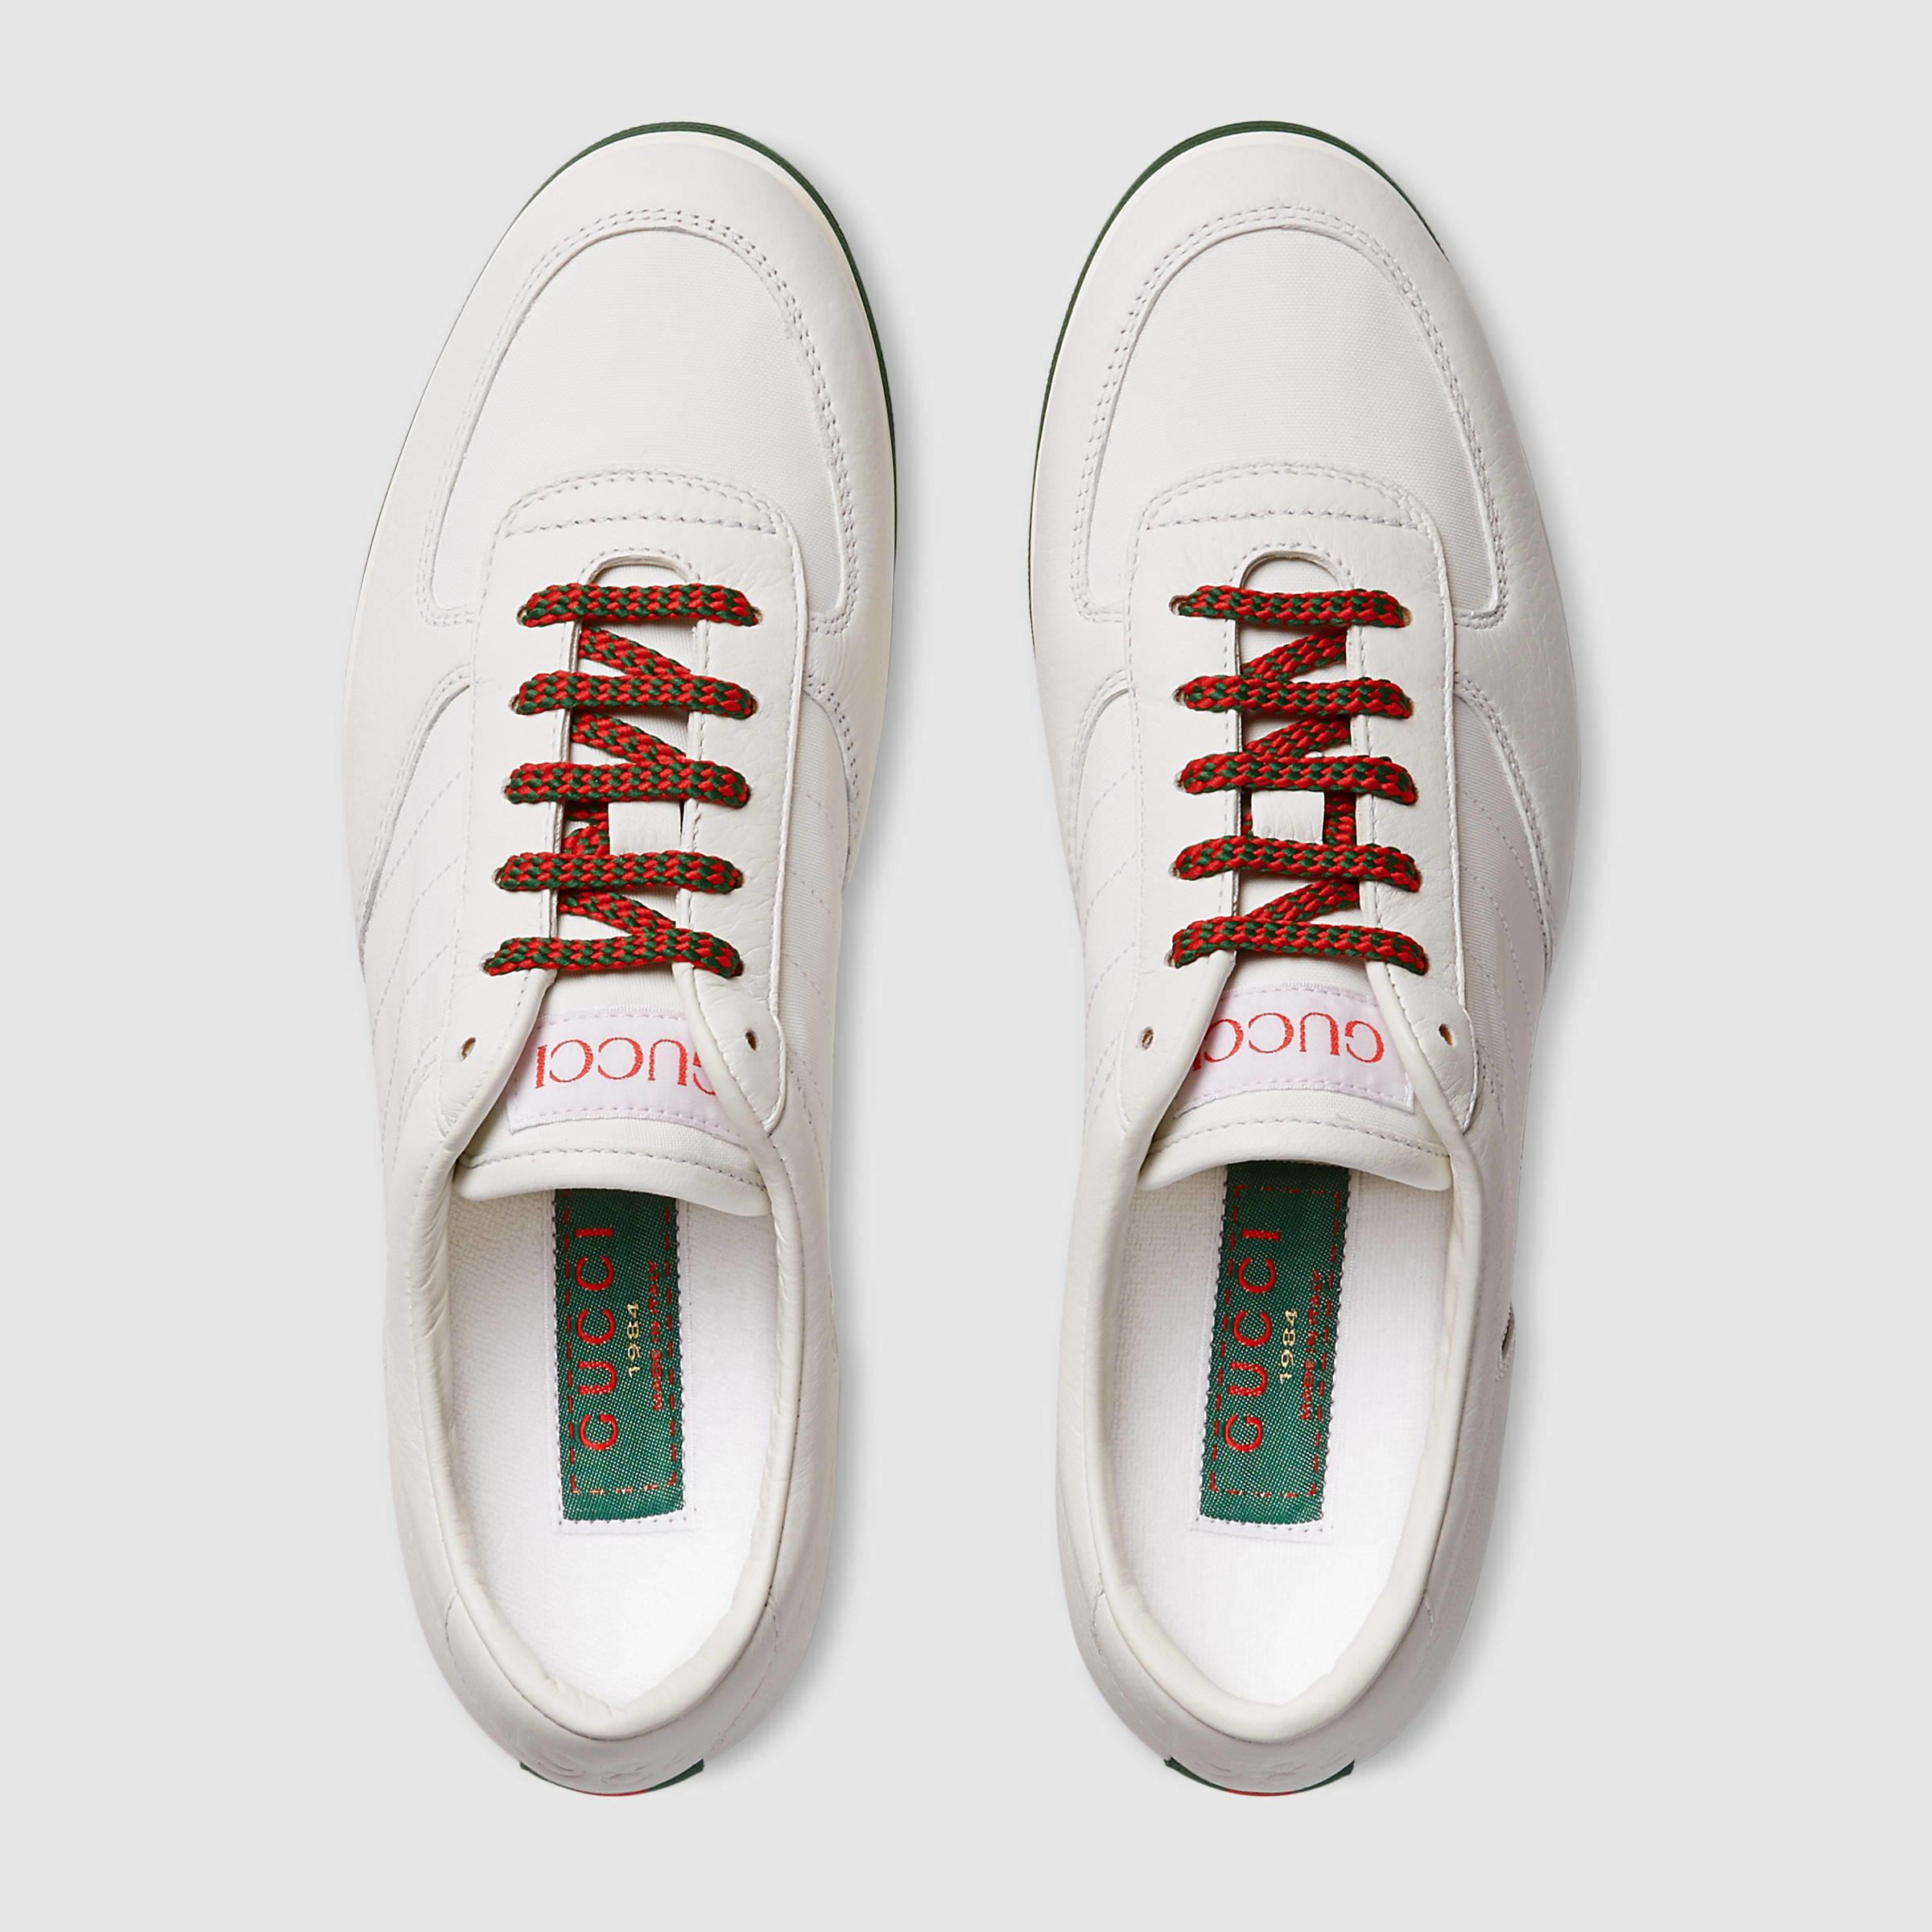 1984 gucci sneakers for sale